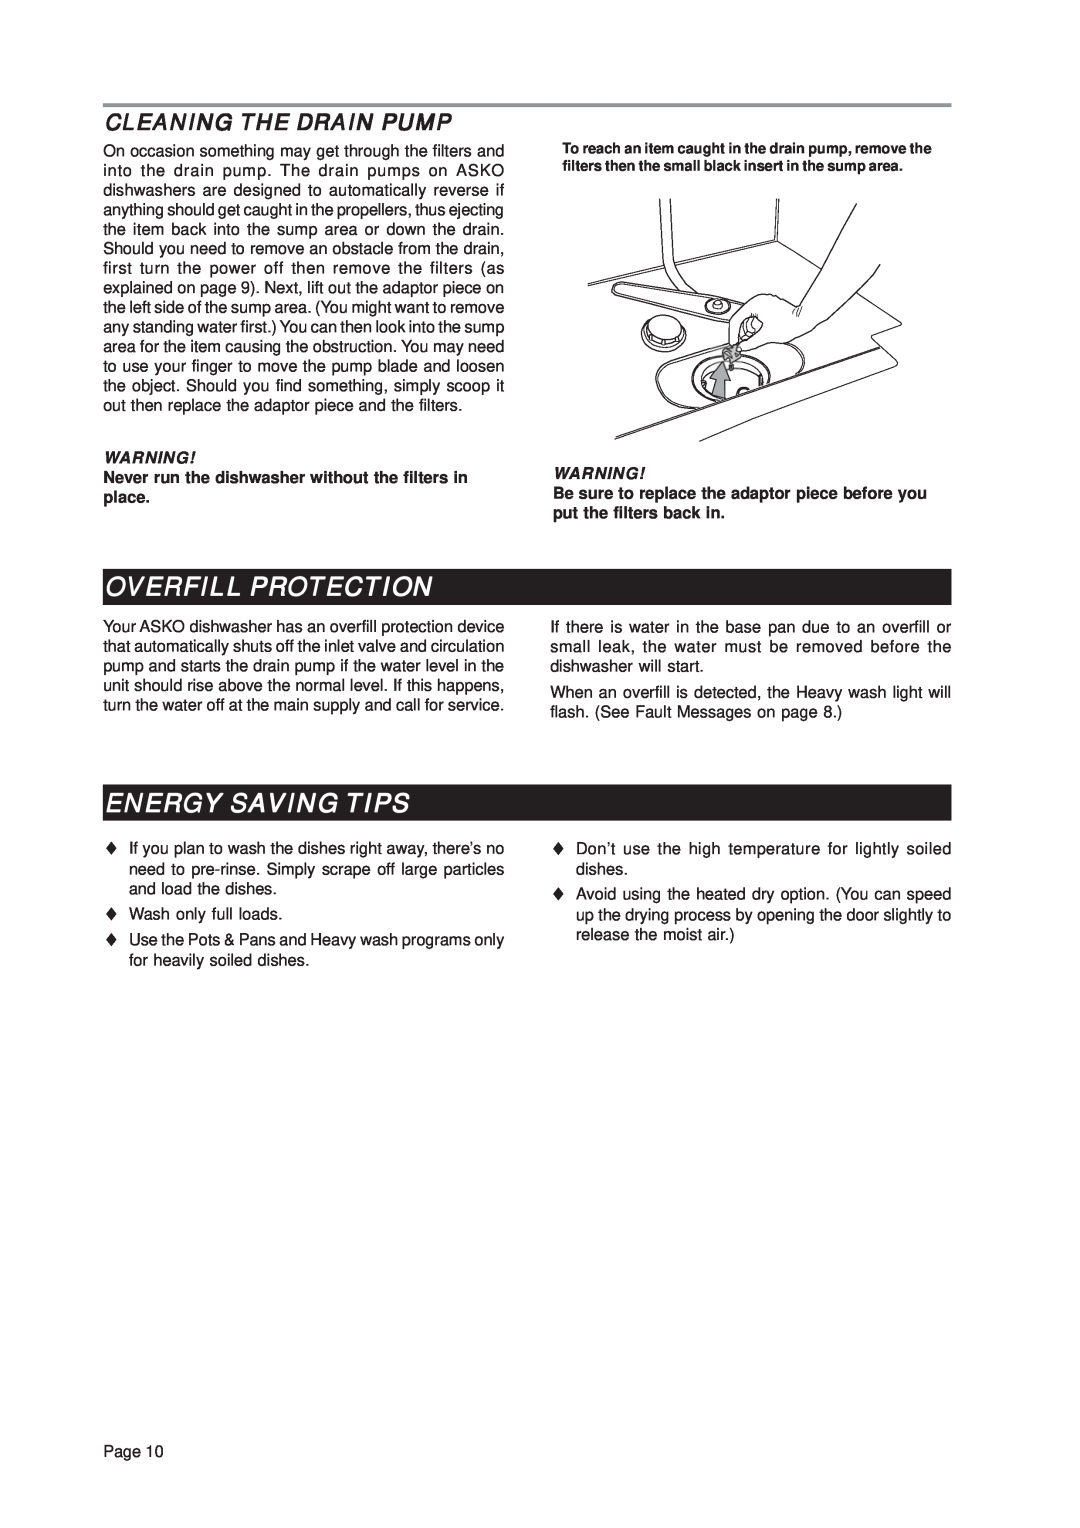 Asko D3432 important safety instructions Overfill Protection, Energy Saving Tips, Cleaning The Drain Pump 